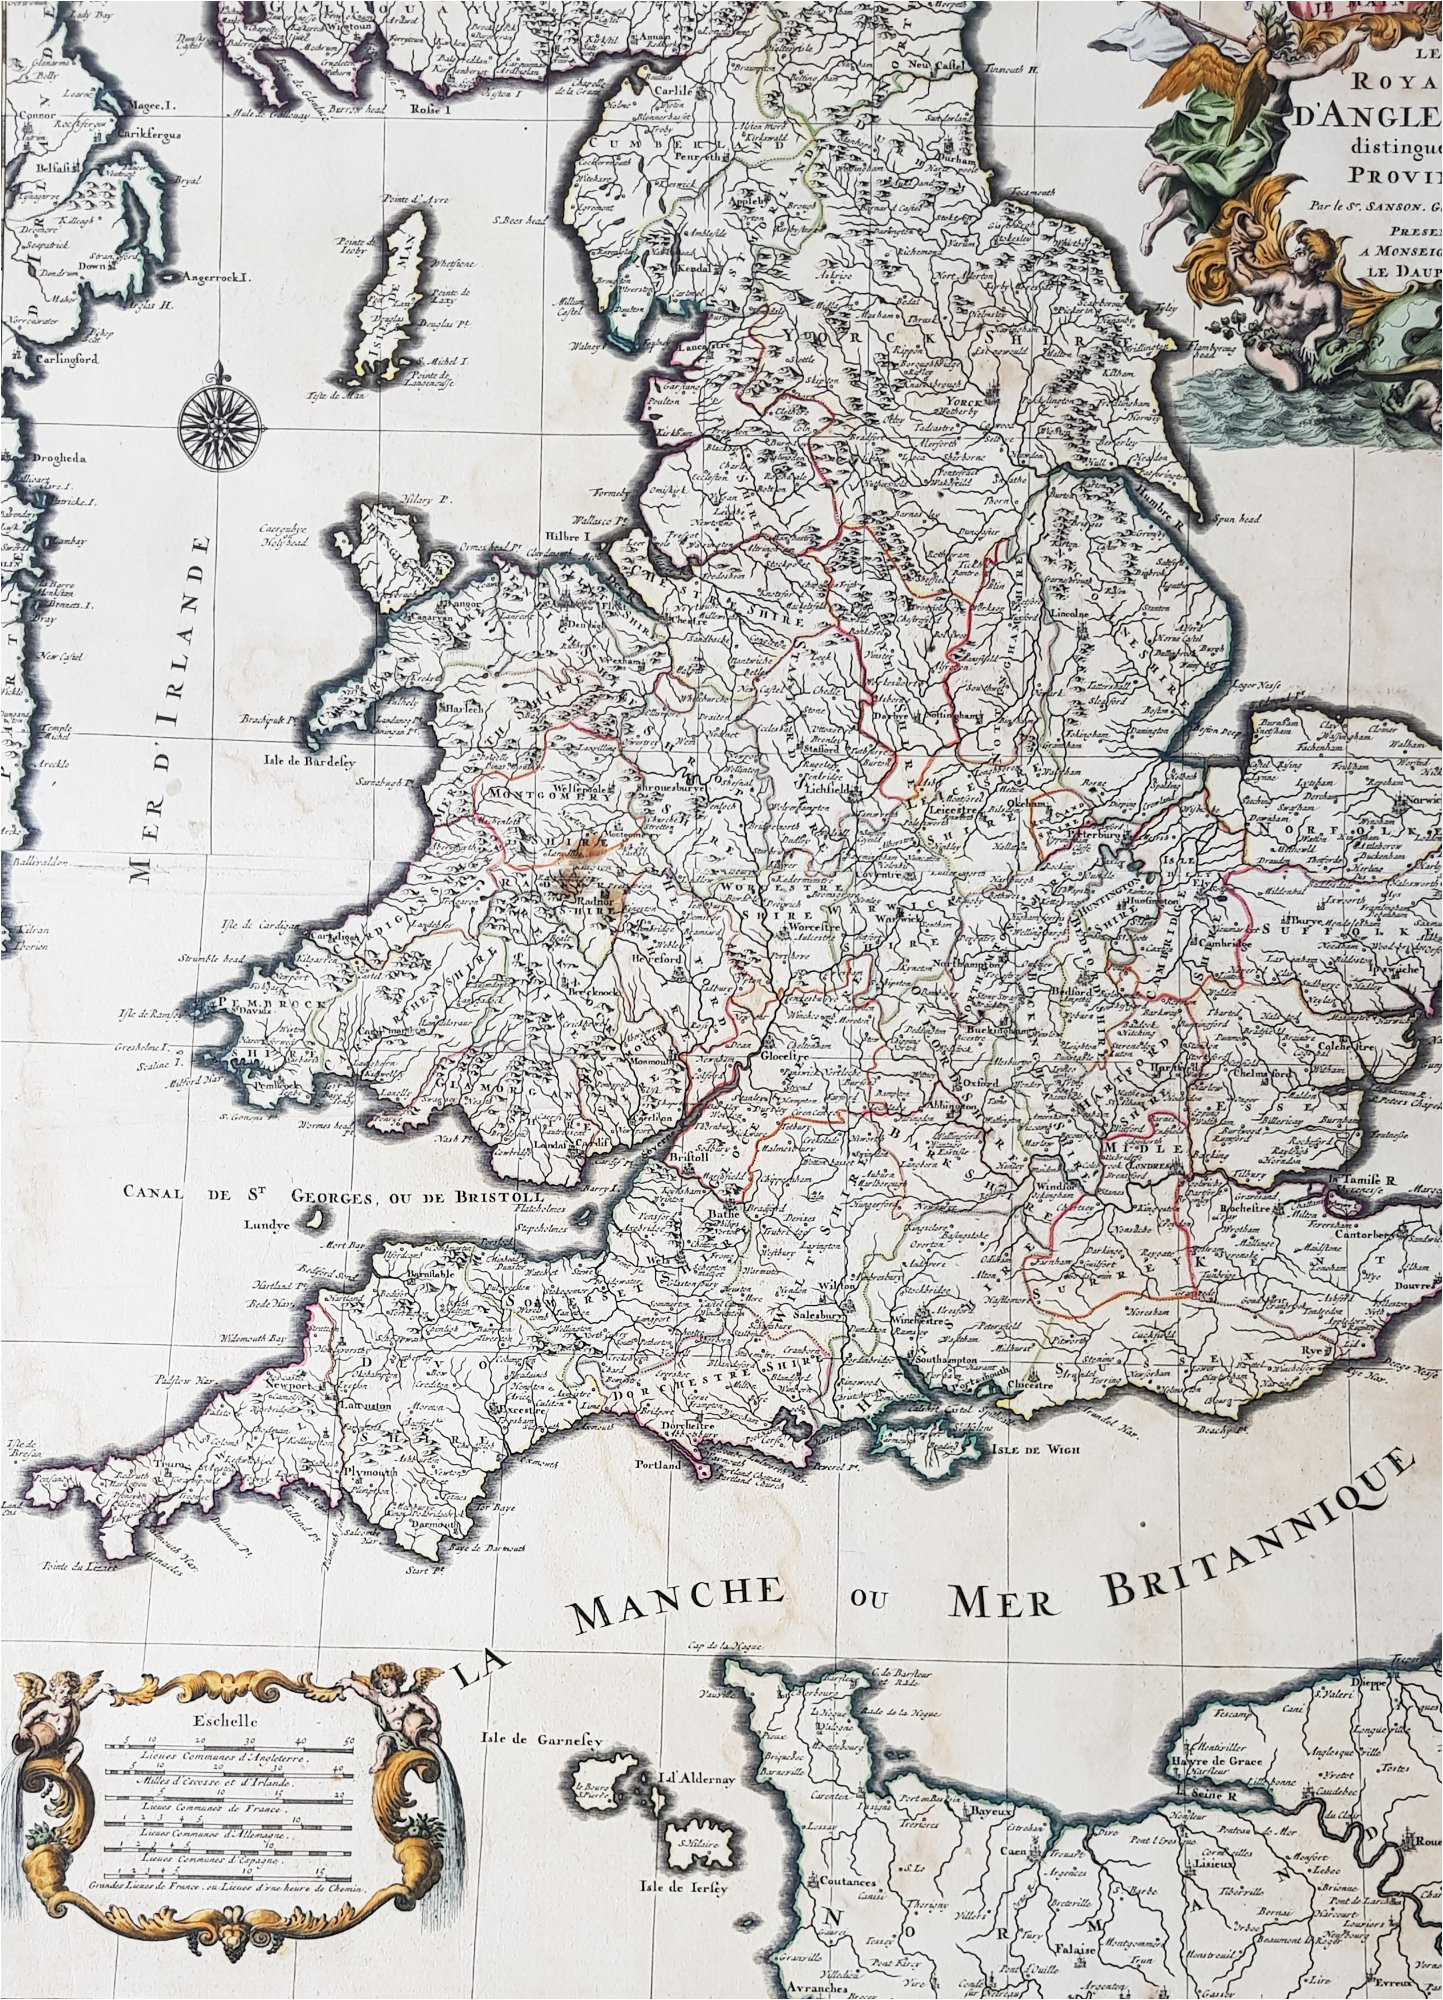 1693 alexis jaillot large 1st edition antique map of england wales